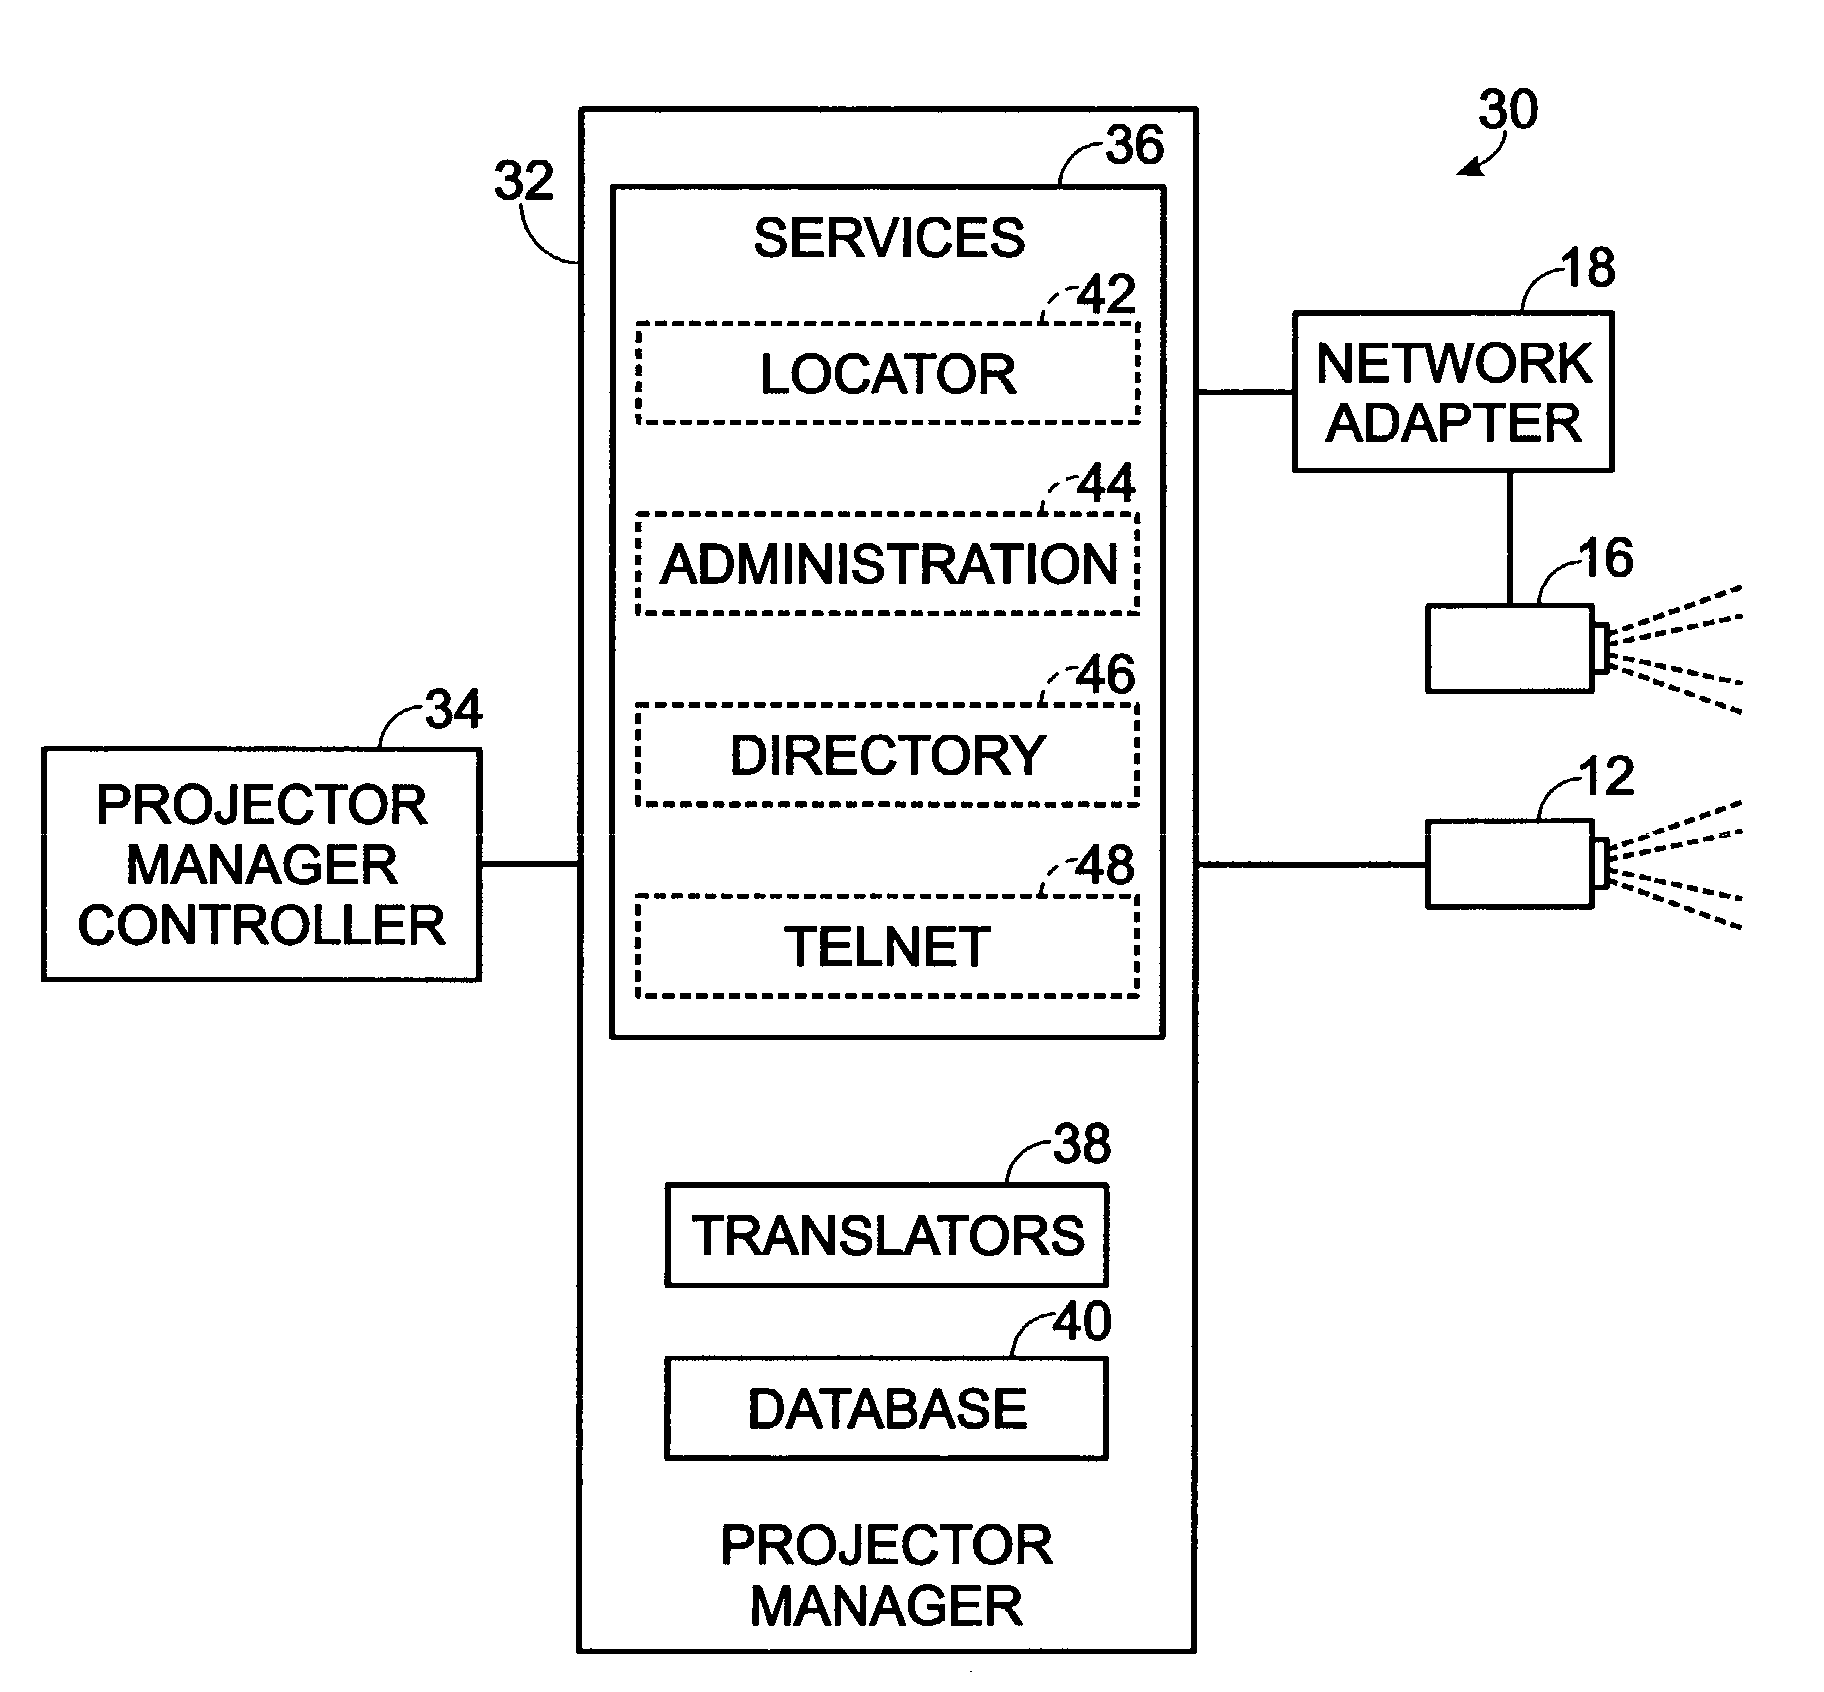 Projector device management system